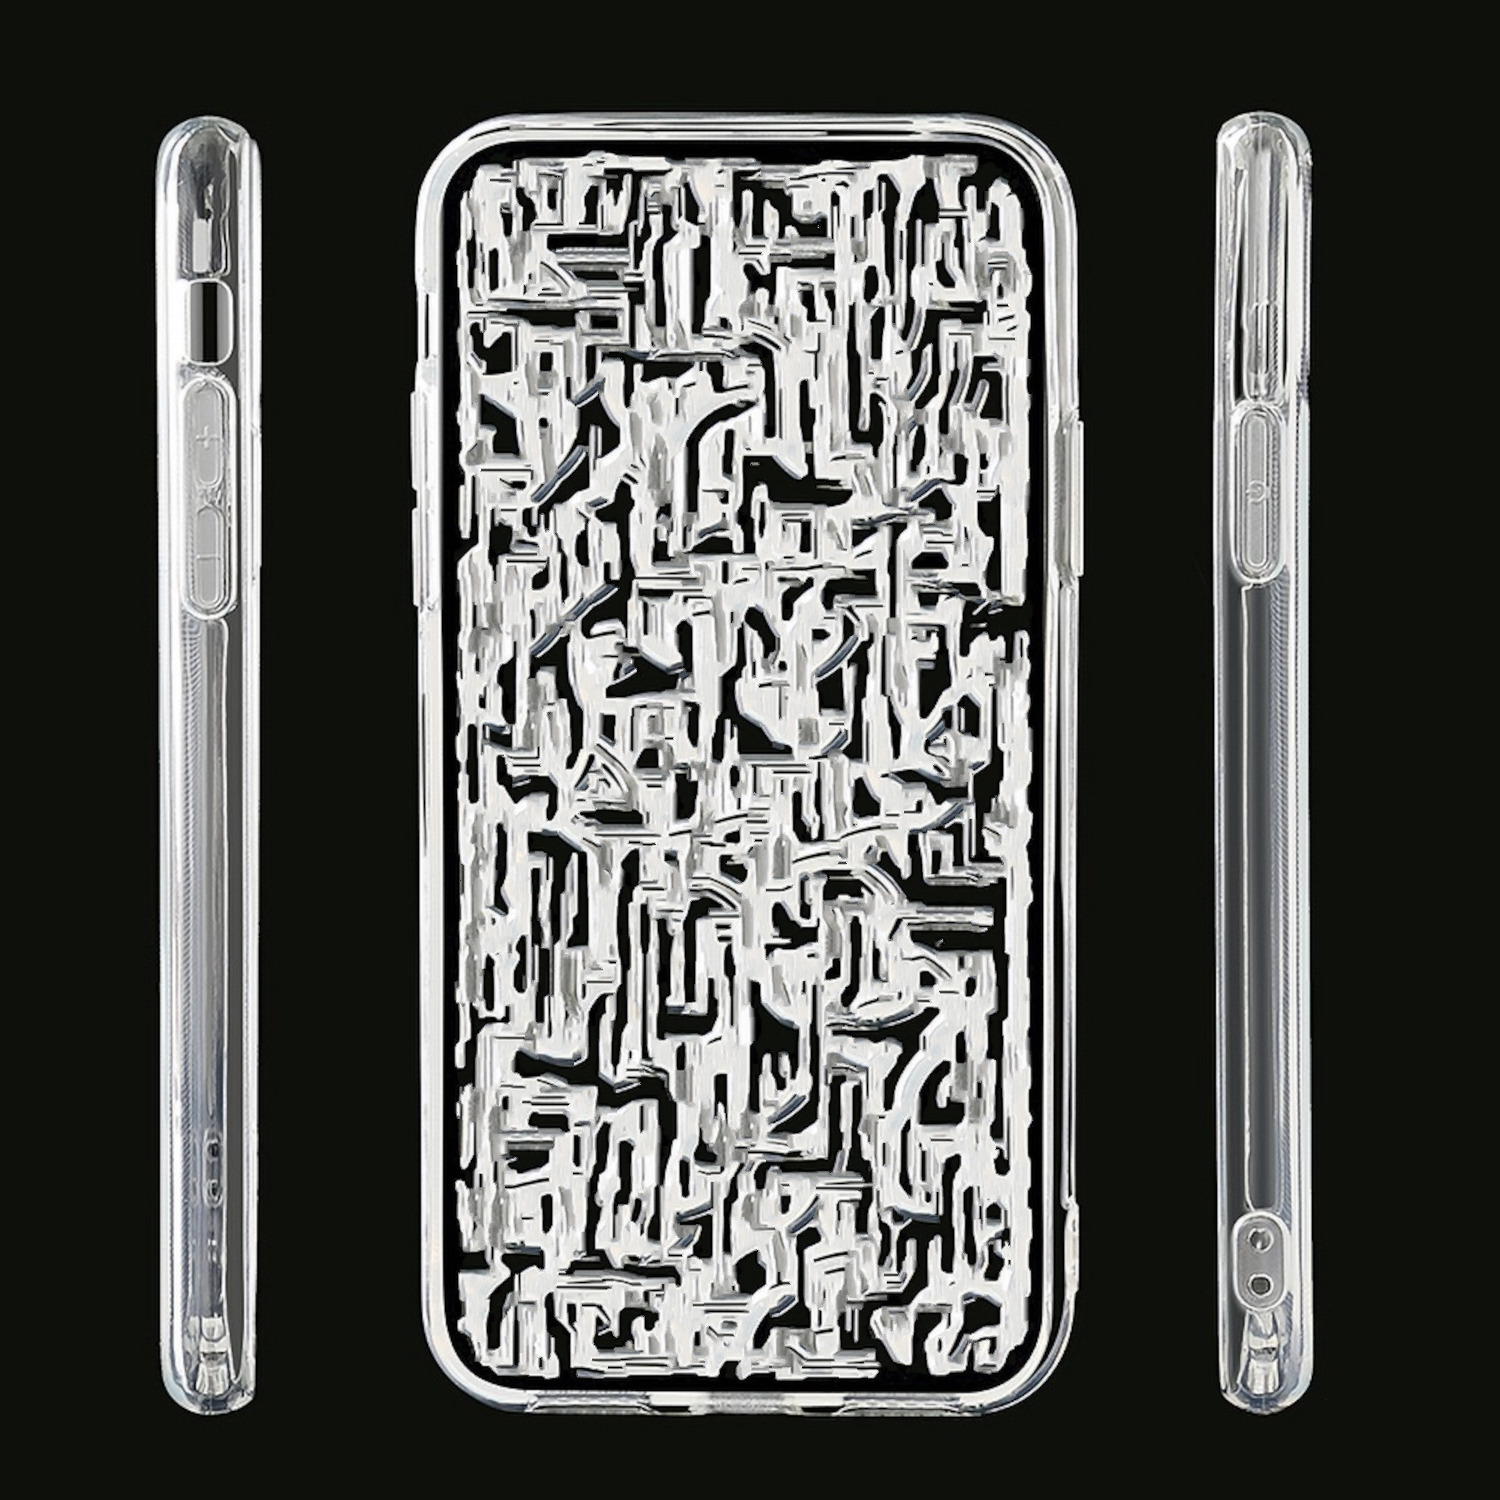 JAMCOVER Transparent Backcover, 14, Strong, mm Case Apple, 2.0 iPhone TPU